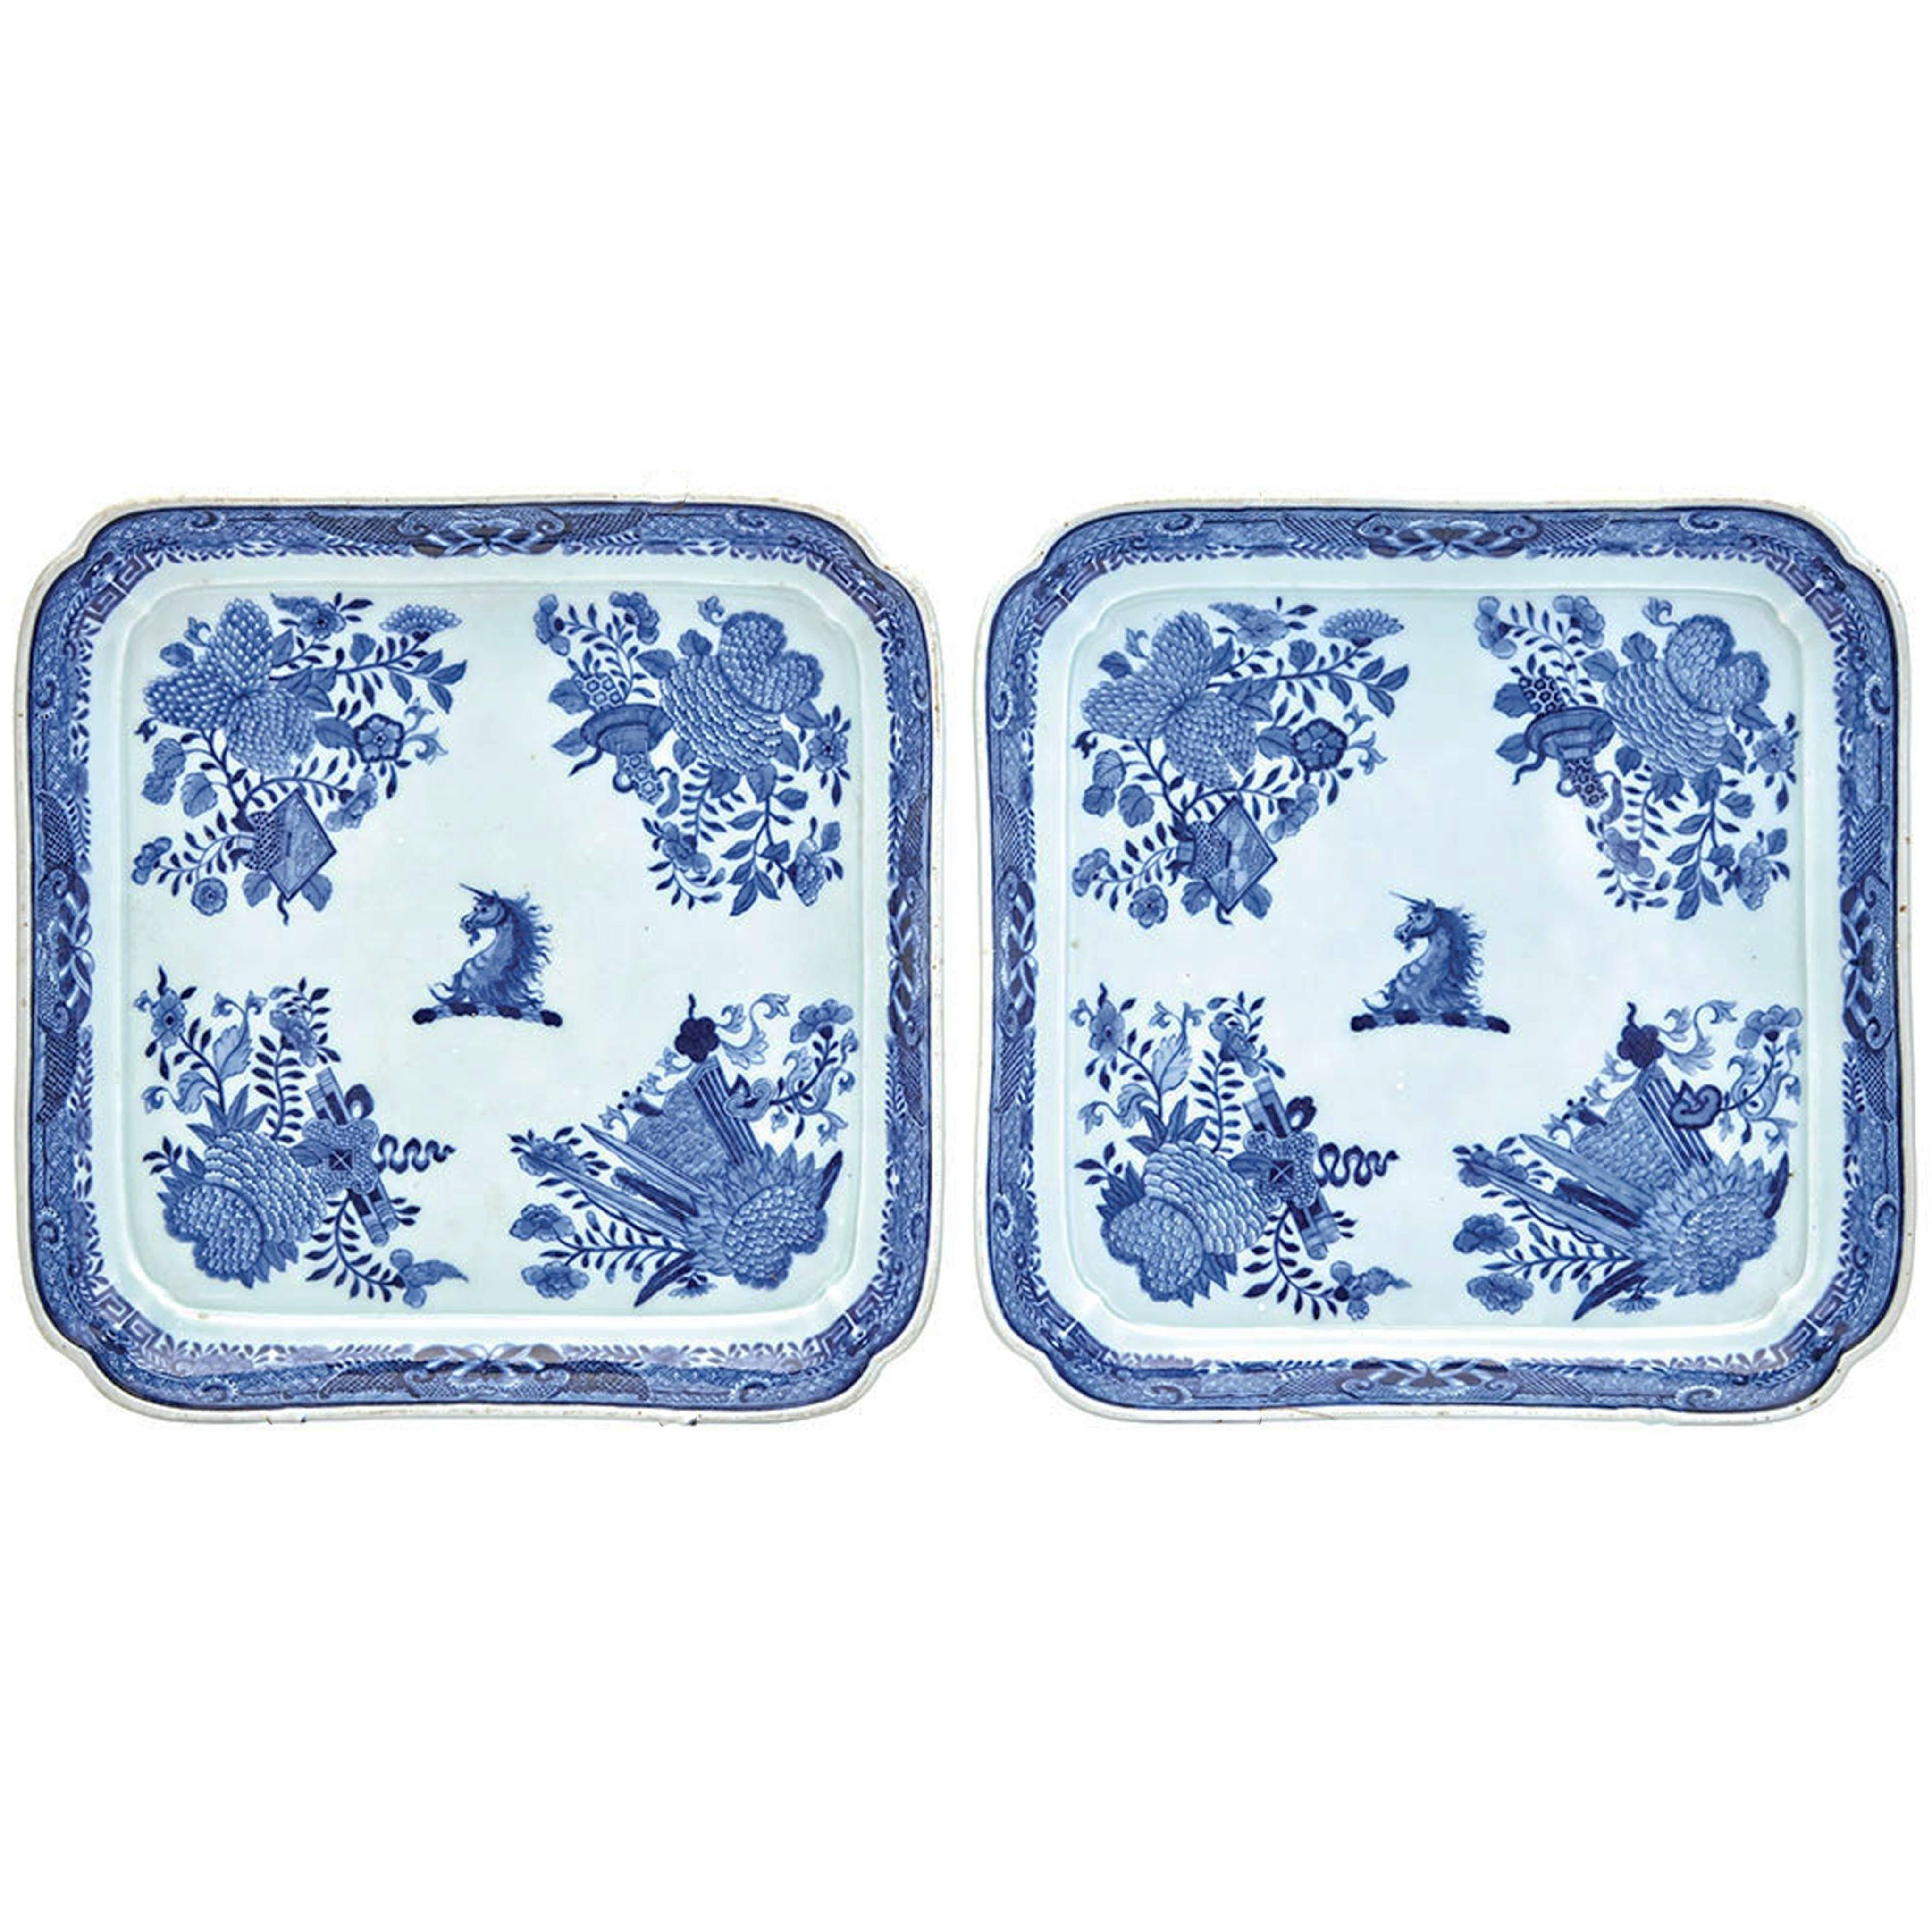 Chinese Export Crested Blue Fitzhugh Footed Trays, Beale Family, circa 1800